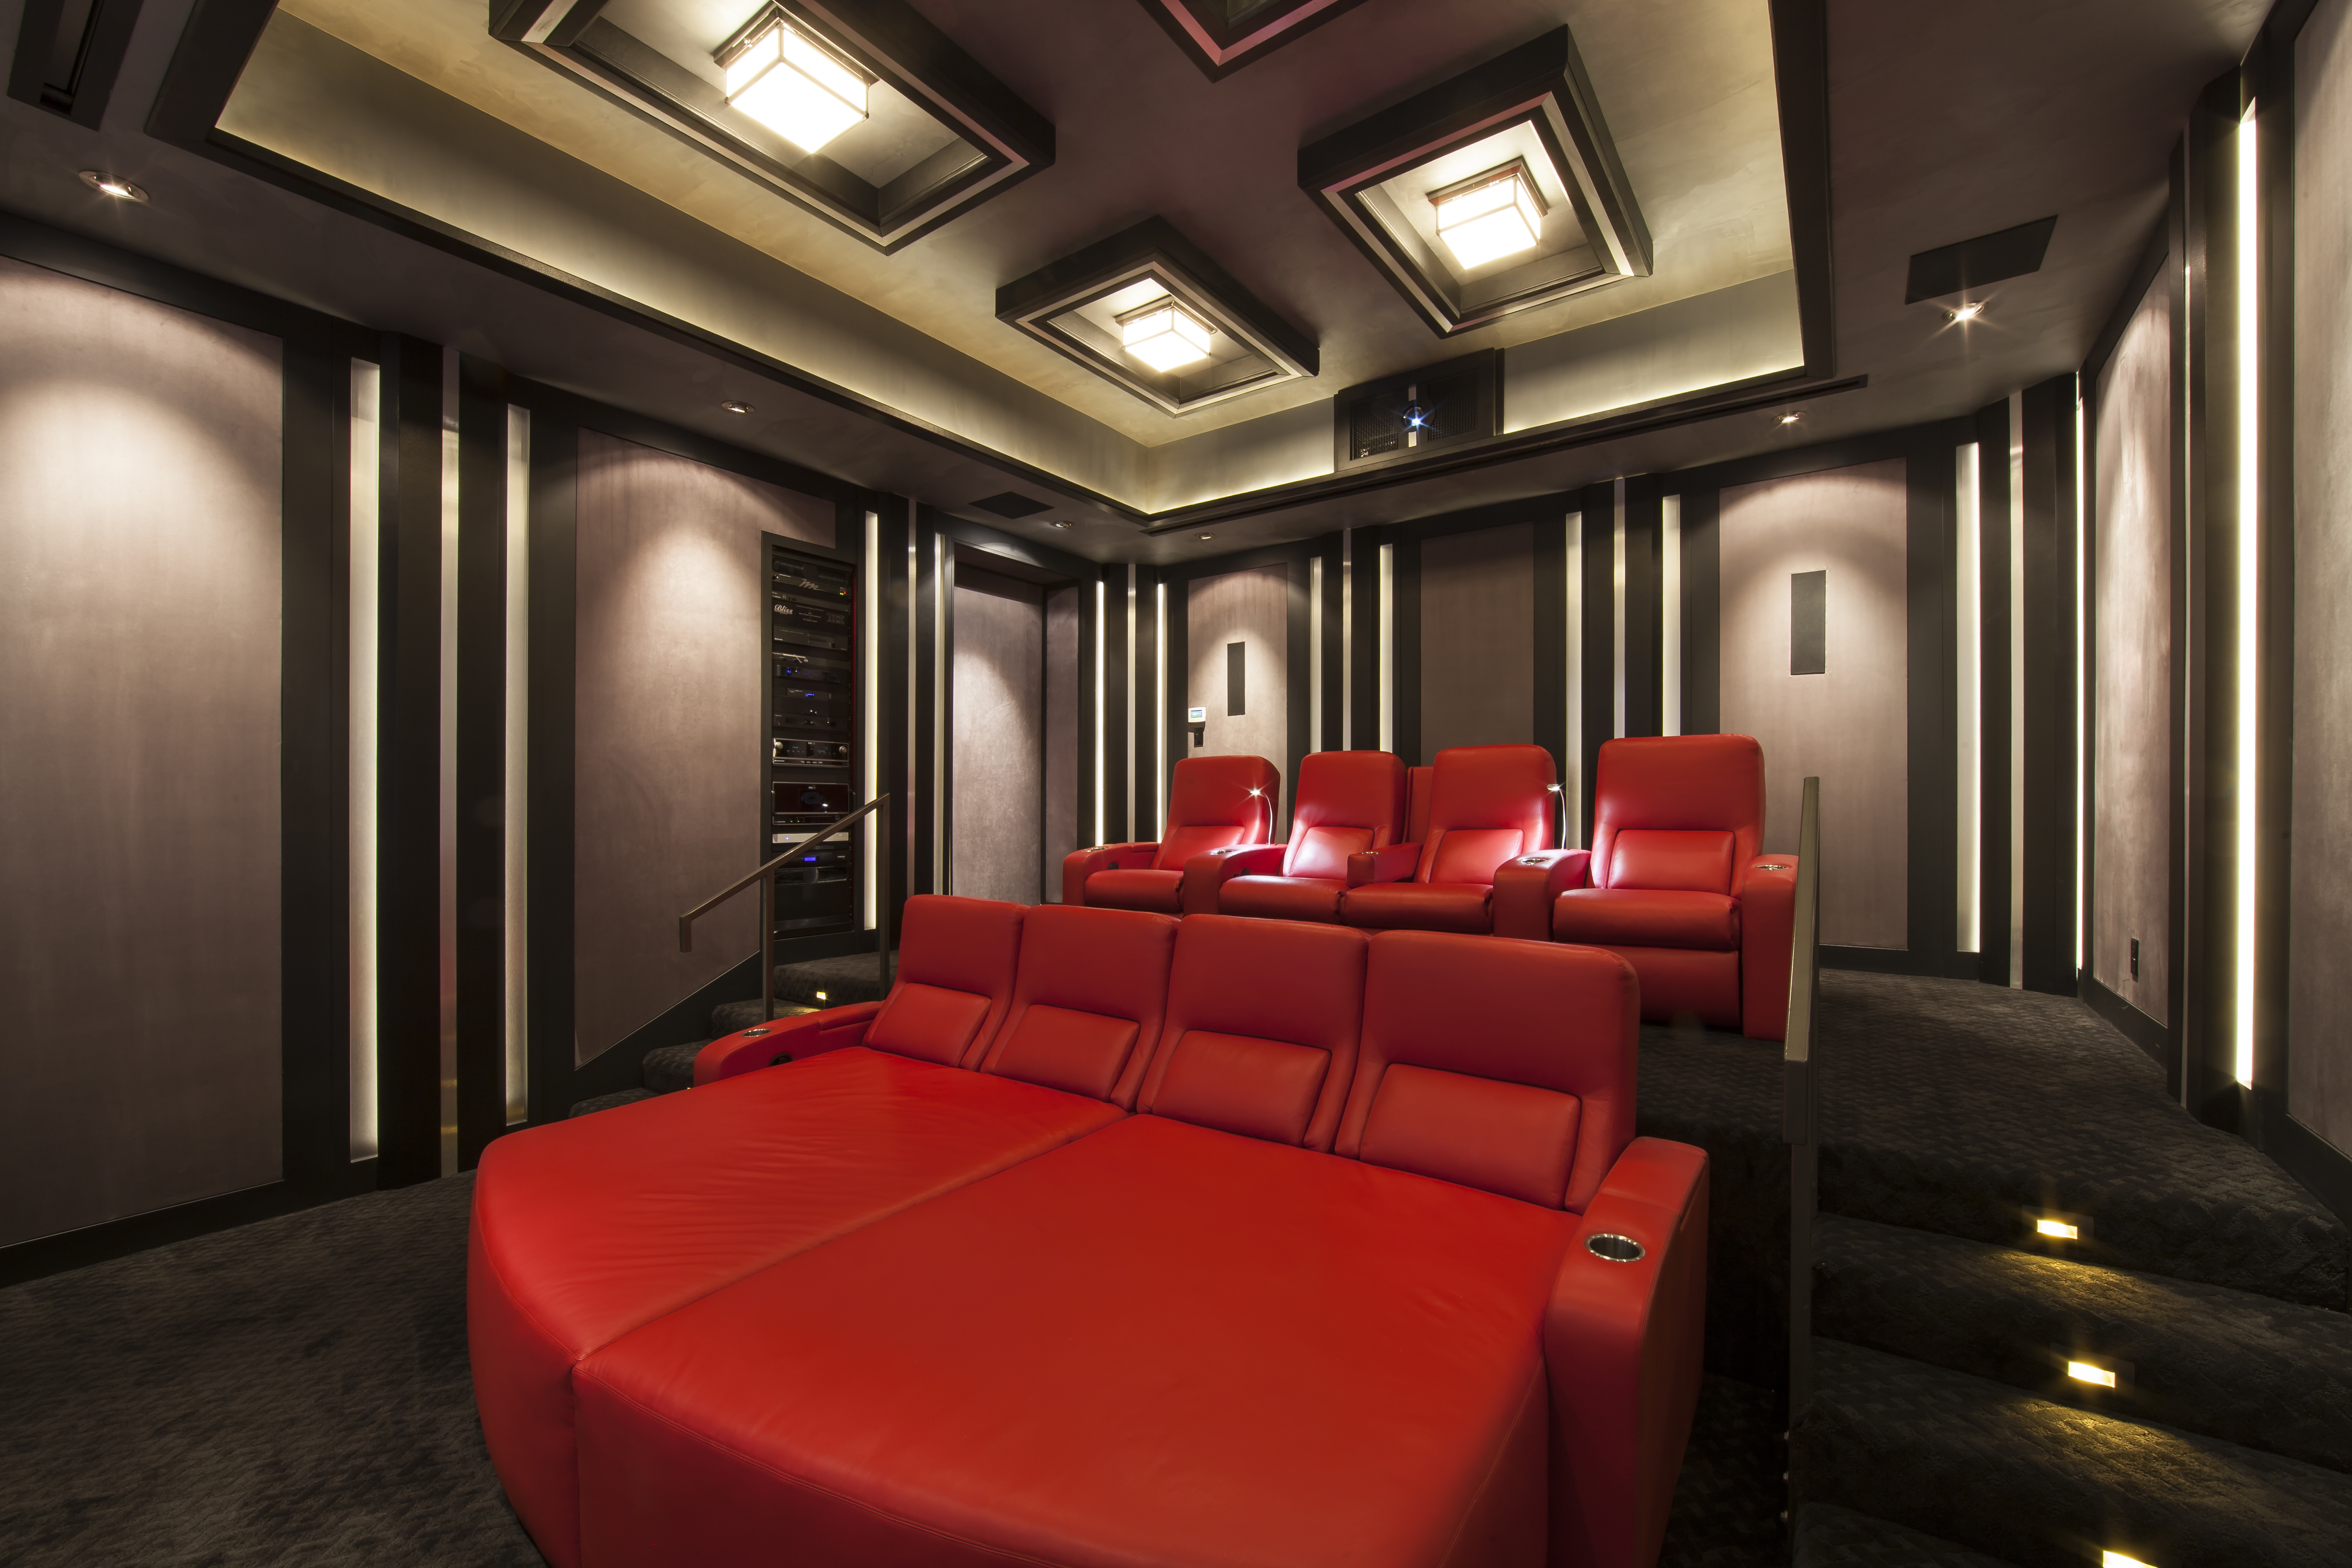 Fortress Seating - Home Theater & Media Room Furniture